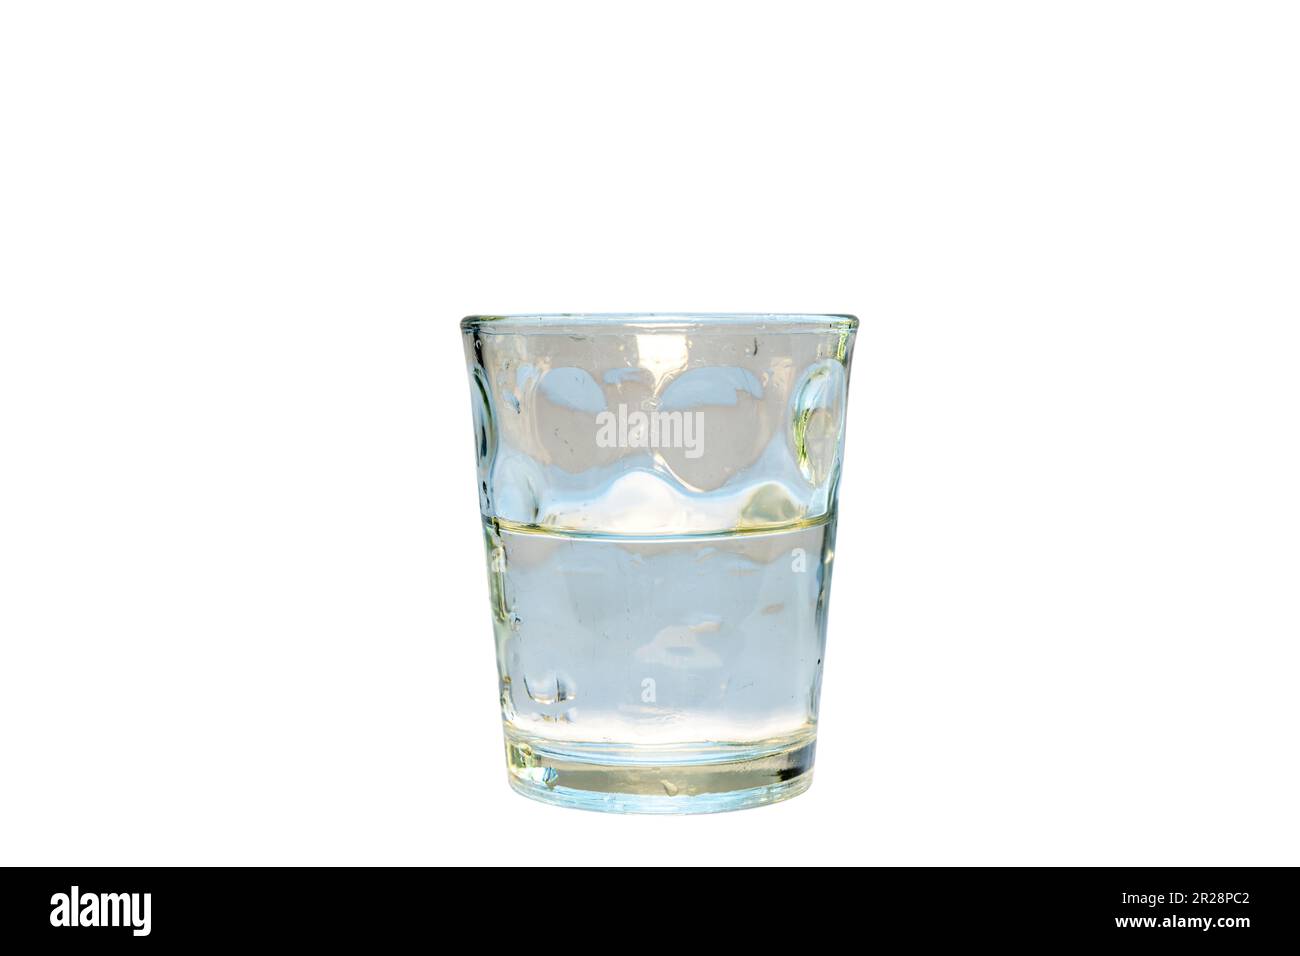 Half glass full with water or half glass empty isolated on white background Stock Photo